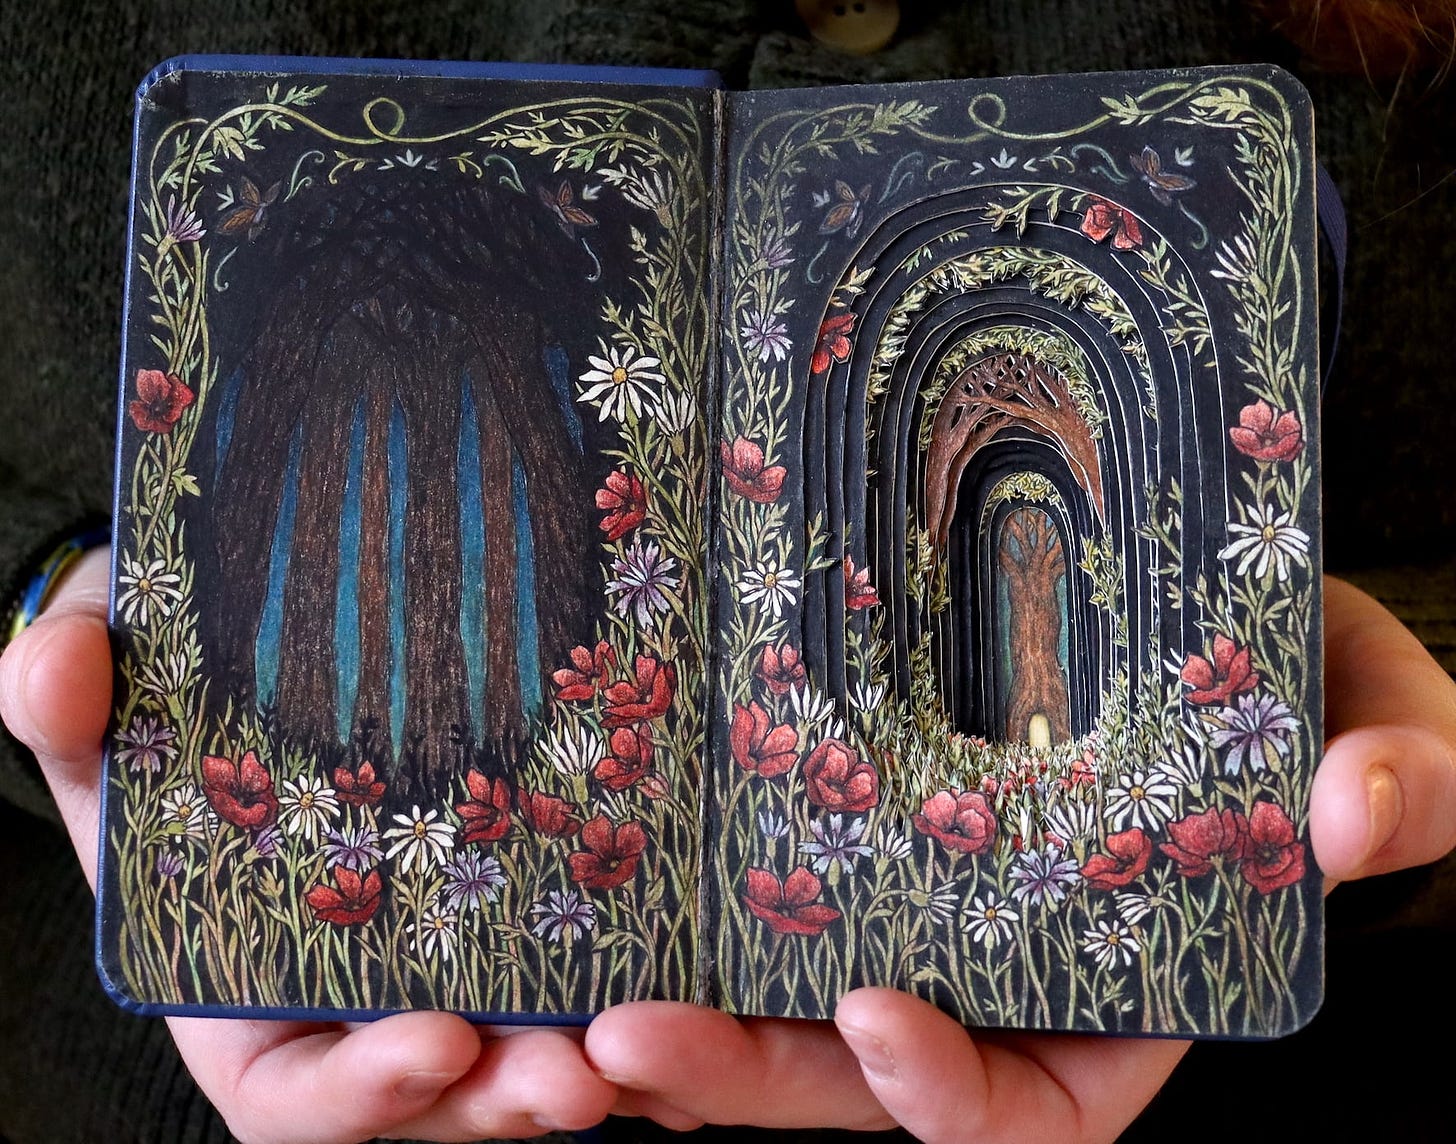 A photo of a book opened to reveal a cut-paper forest scene